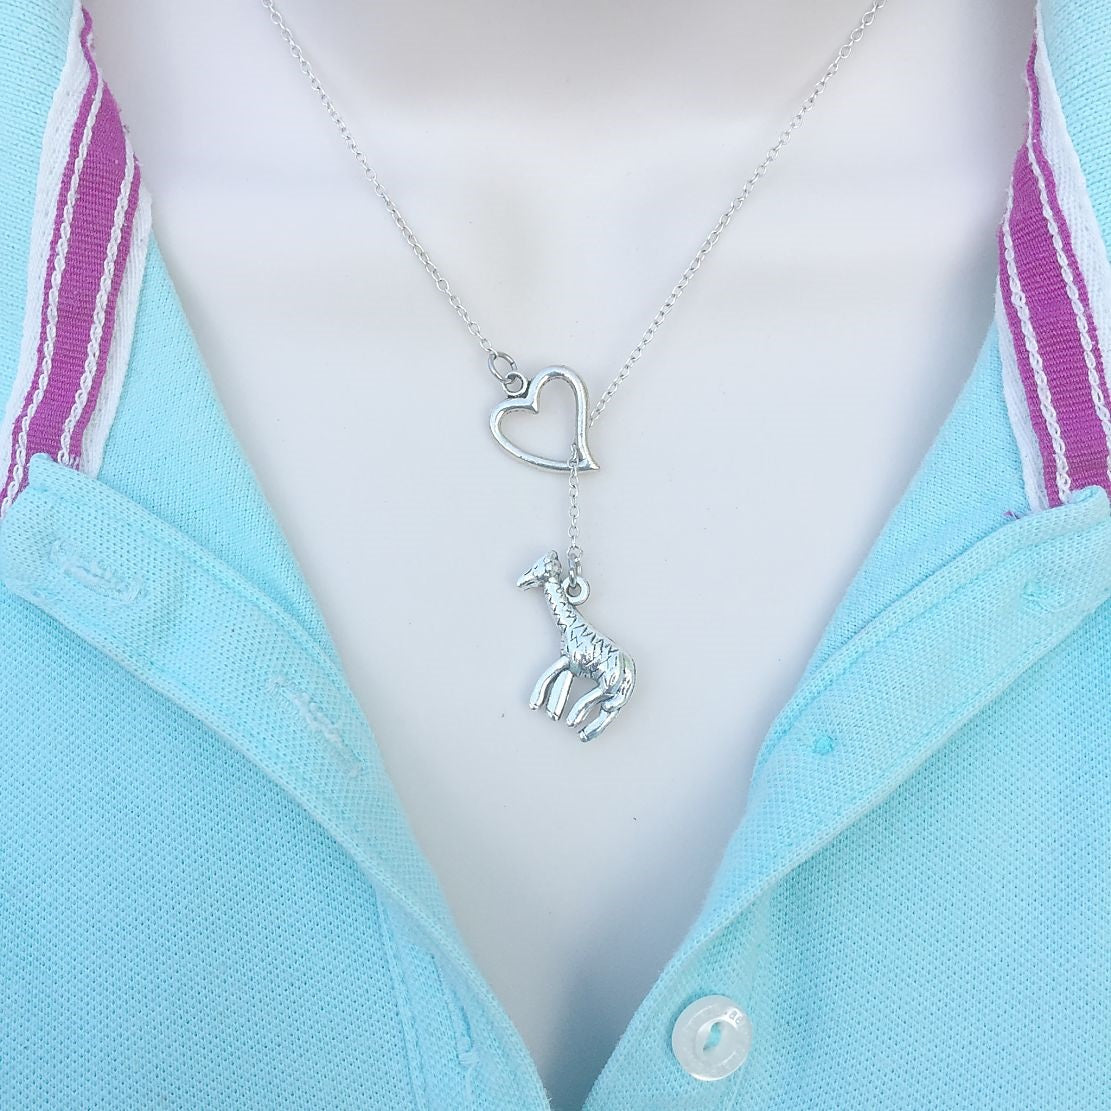 Lovely Giraffe  Silver Lariat Y Necklace.